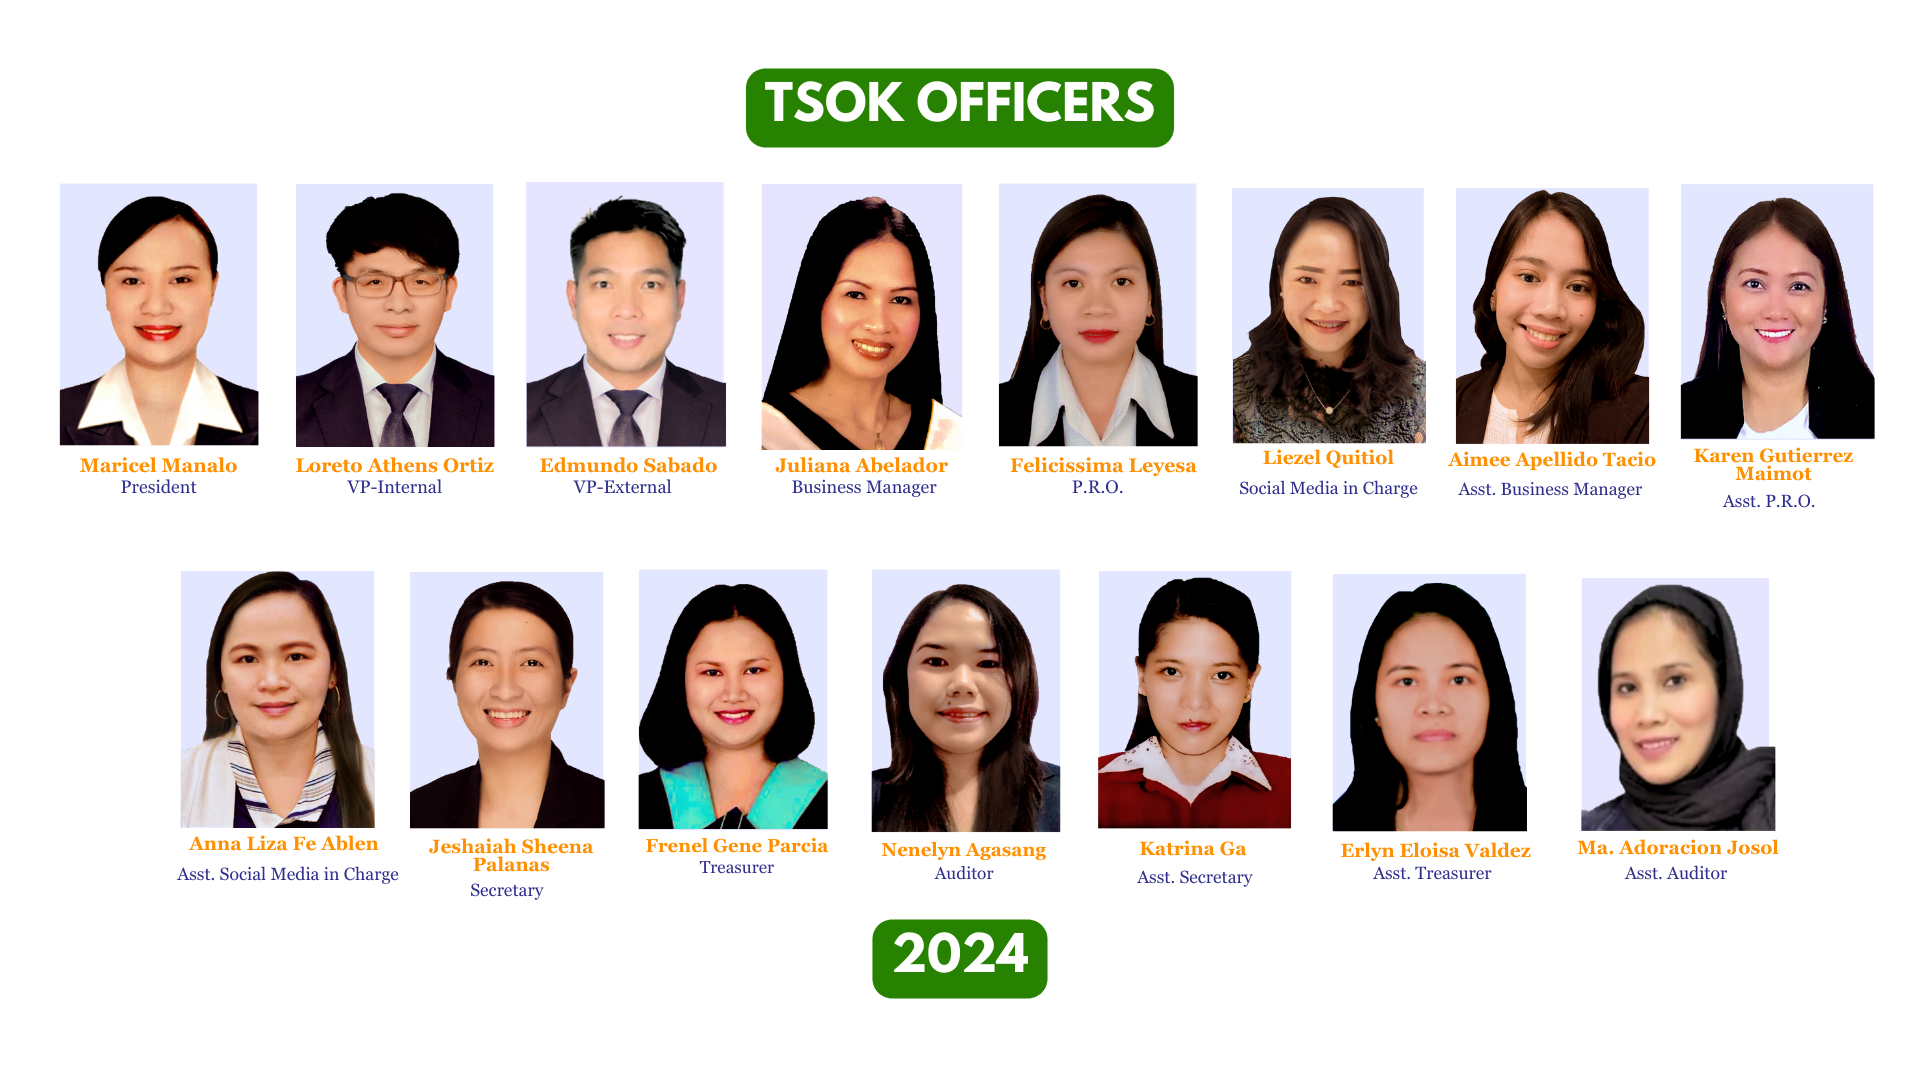 Appointed TSOK Officers for the year 2024.